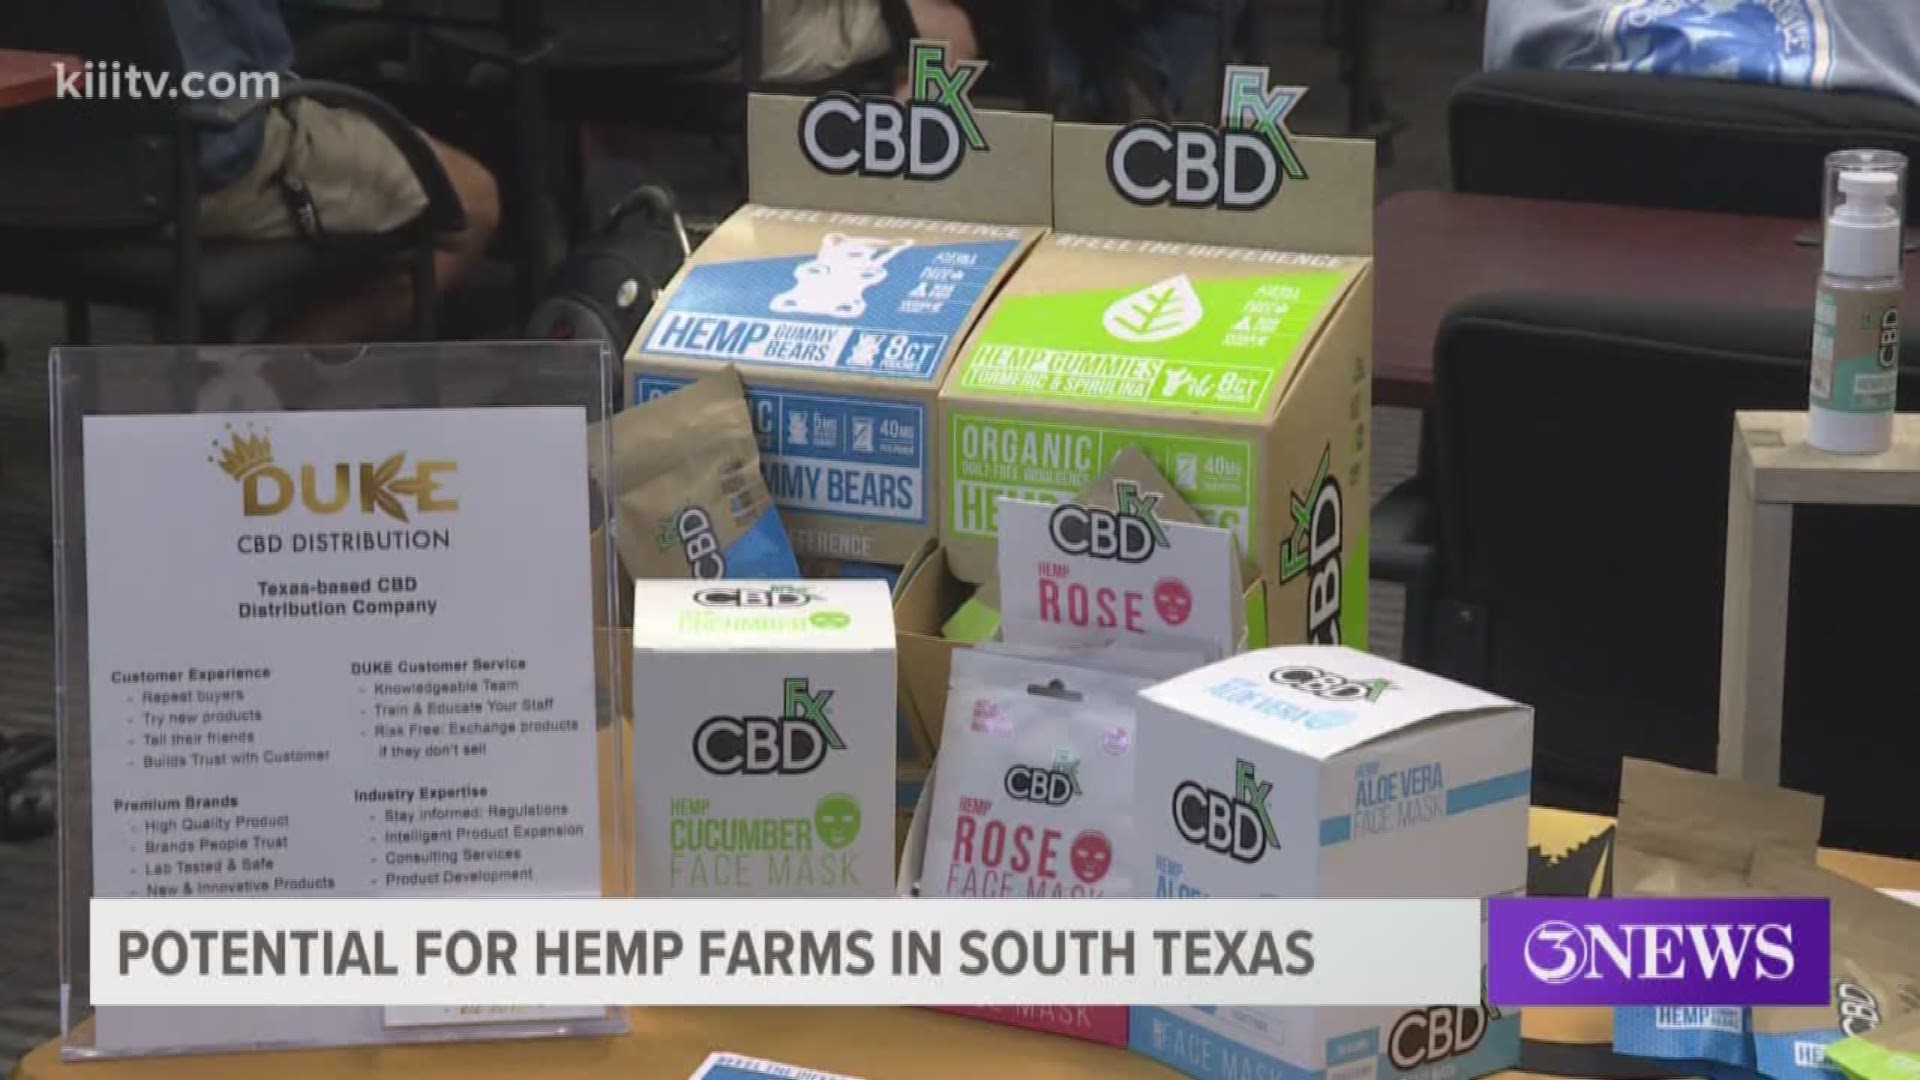 Just weeks after Texas Governor Greg Abbott signed House Bill 1325, farmers gathered in Corpus Christi to learn more about growing hemp for industrial purposes, which was legalized by the bill.